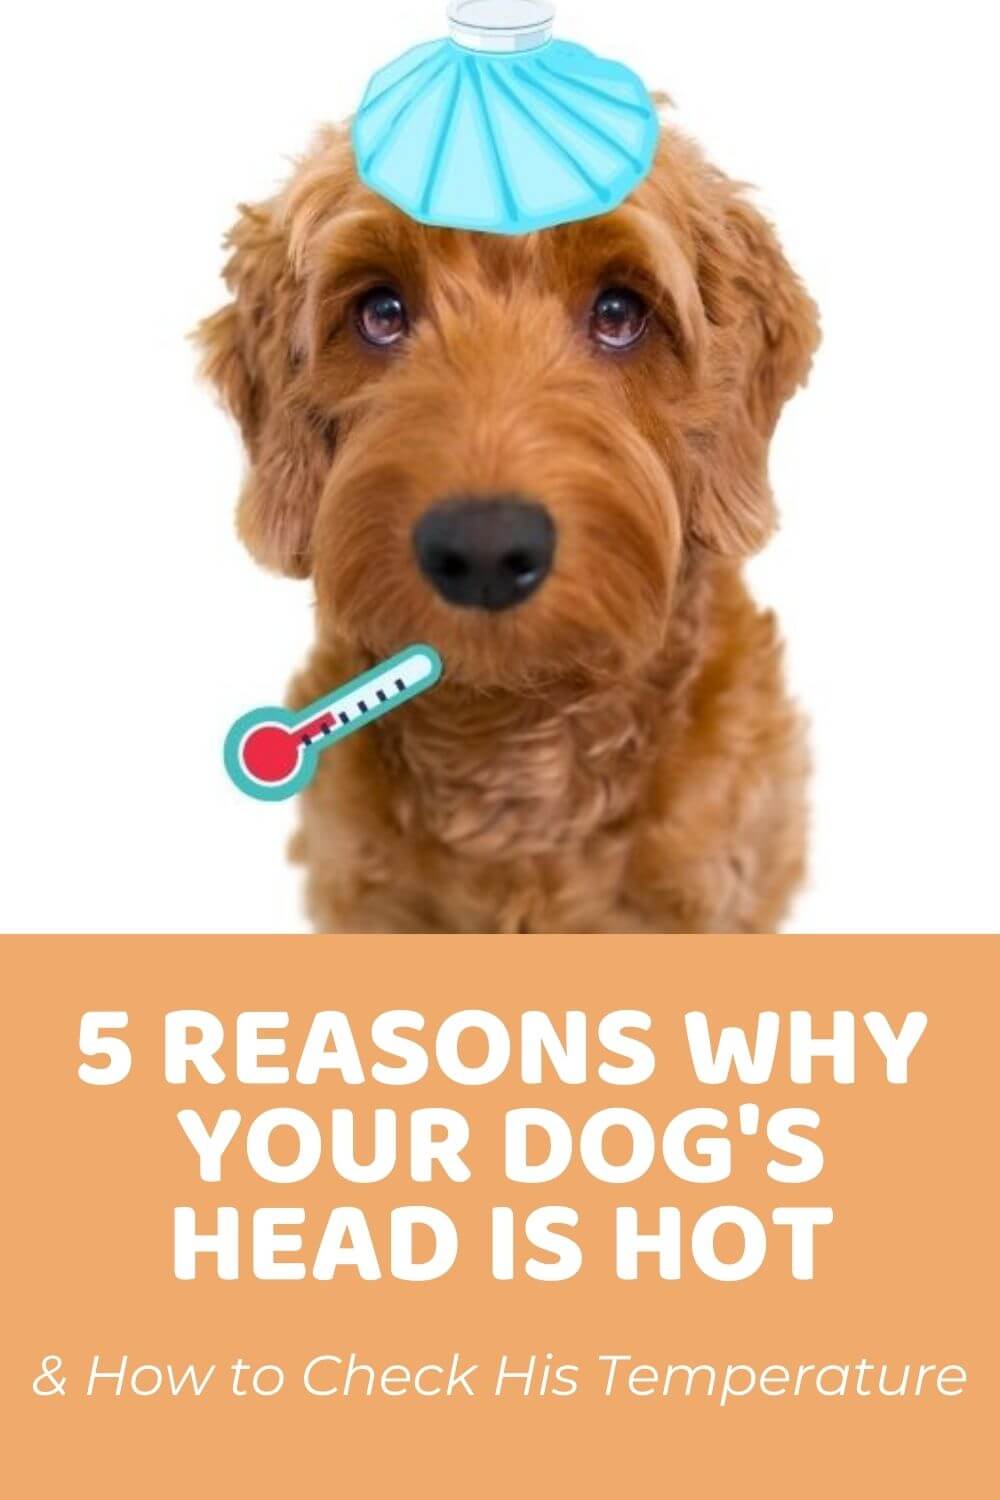 5 Reasons Why Your Dog's Head Is Hot and How to Check Your Dog's Temperature